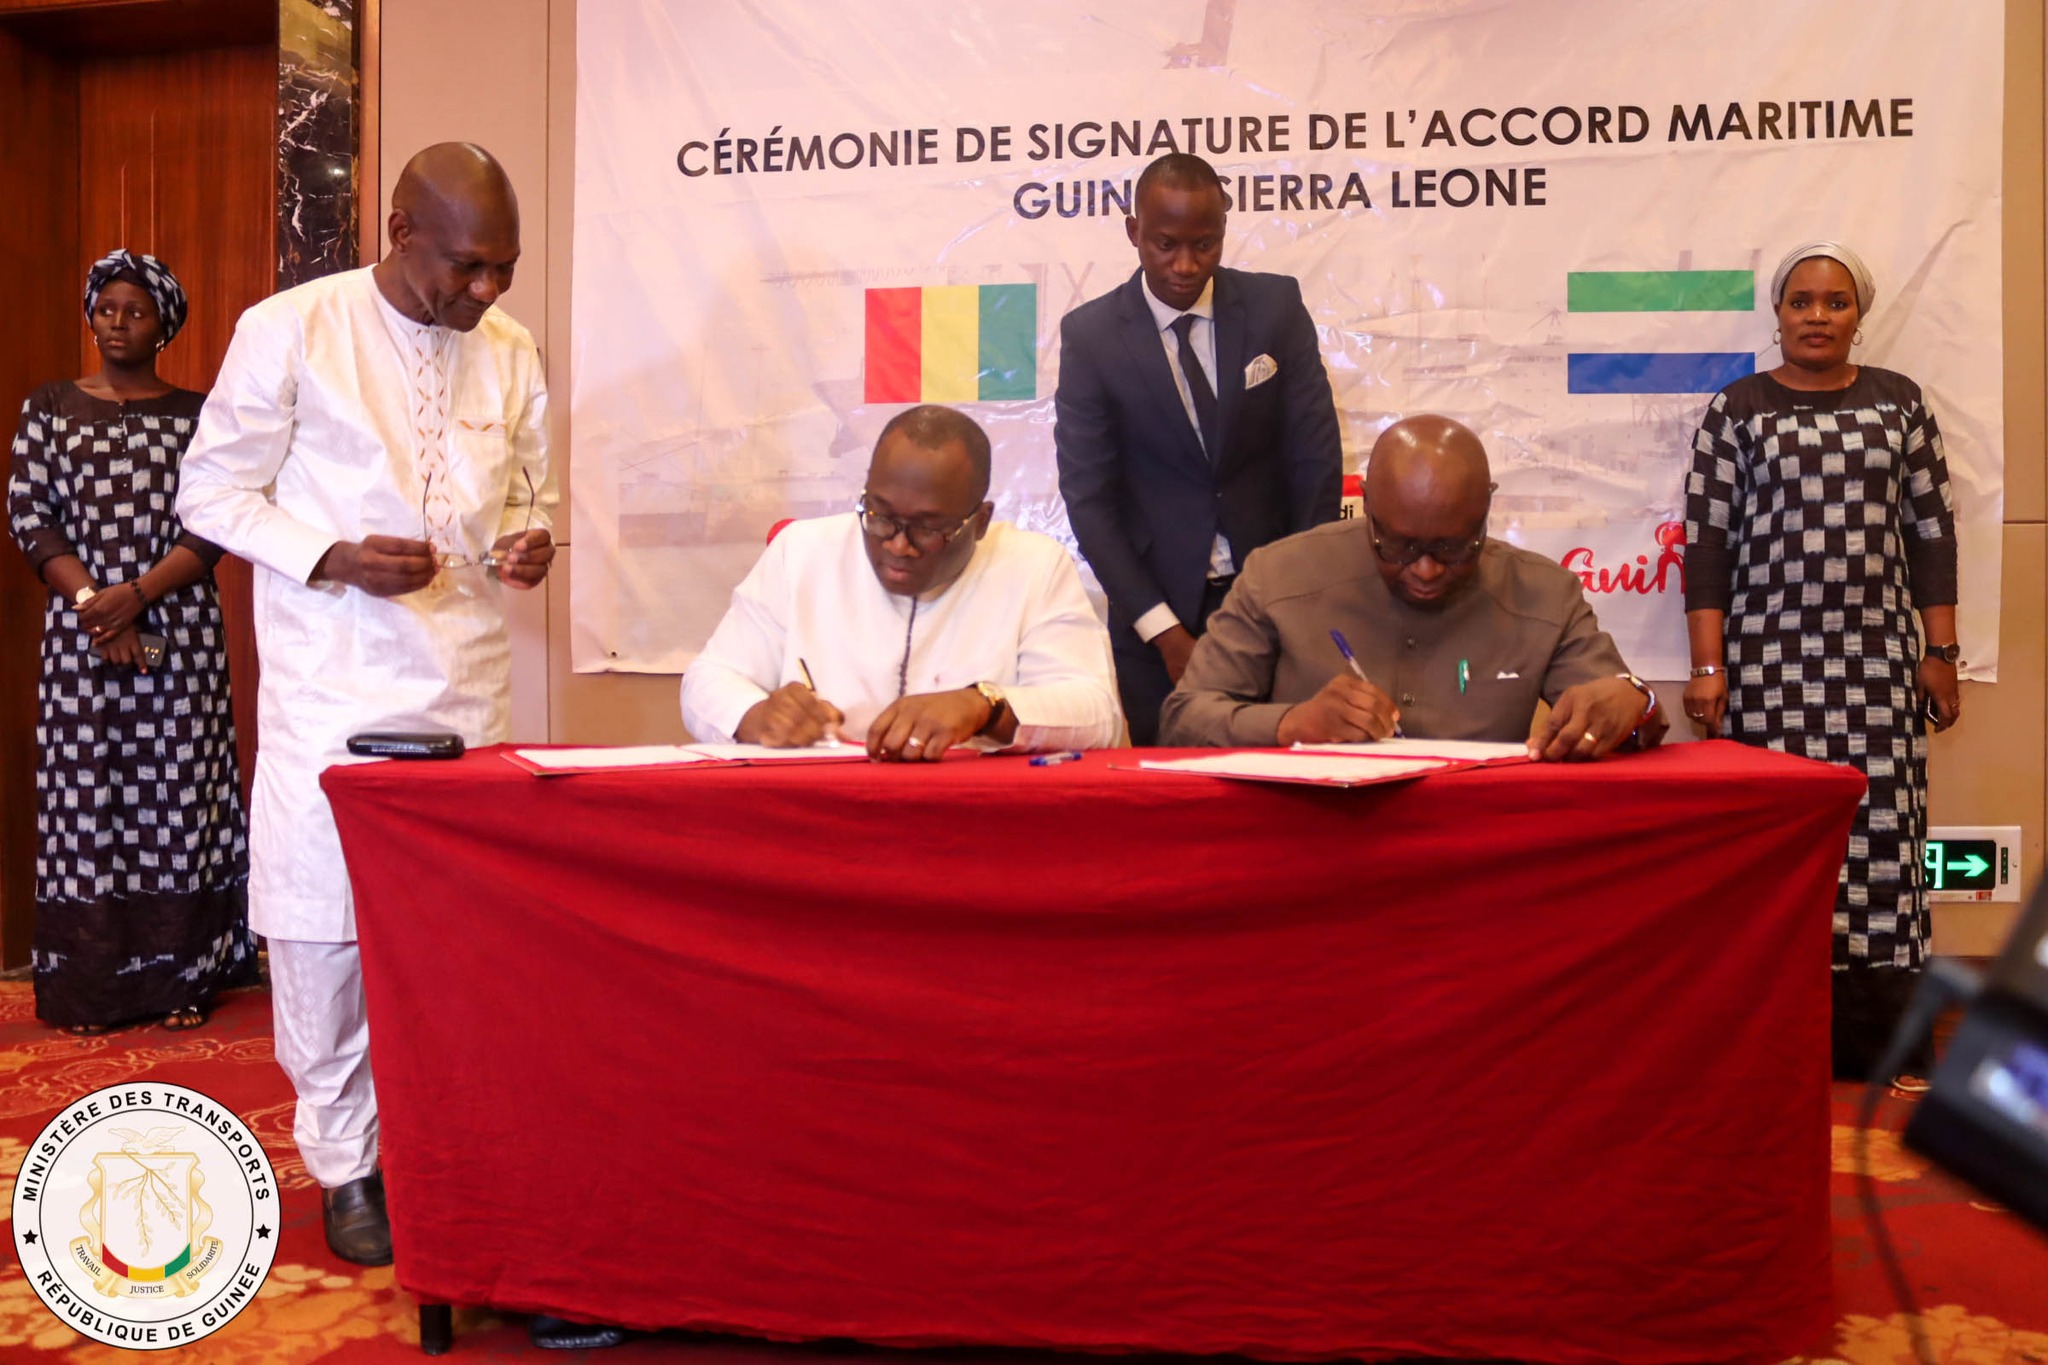 Signing ceremony of a maritime agreement between Guinea and Sierra Leone